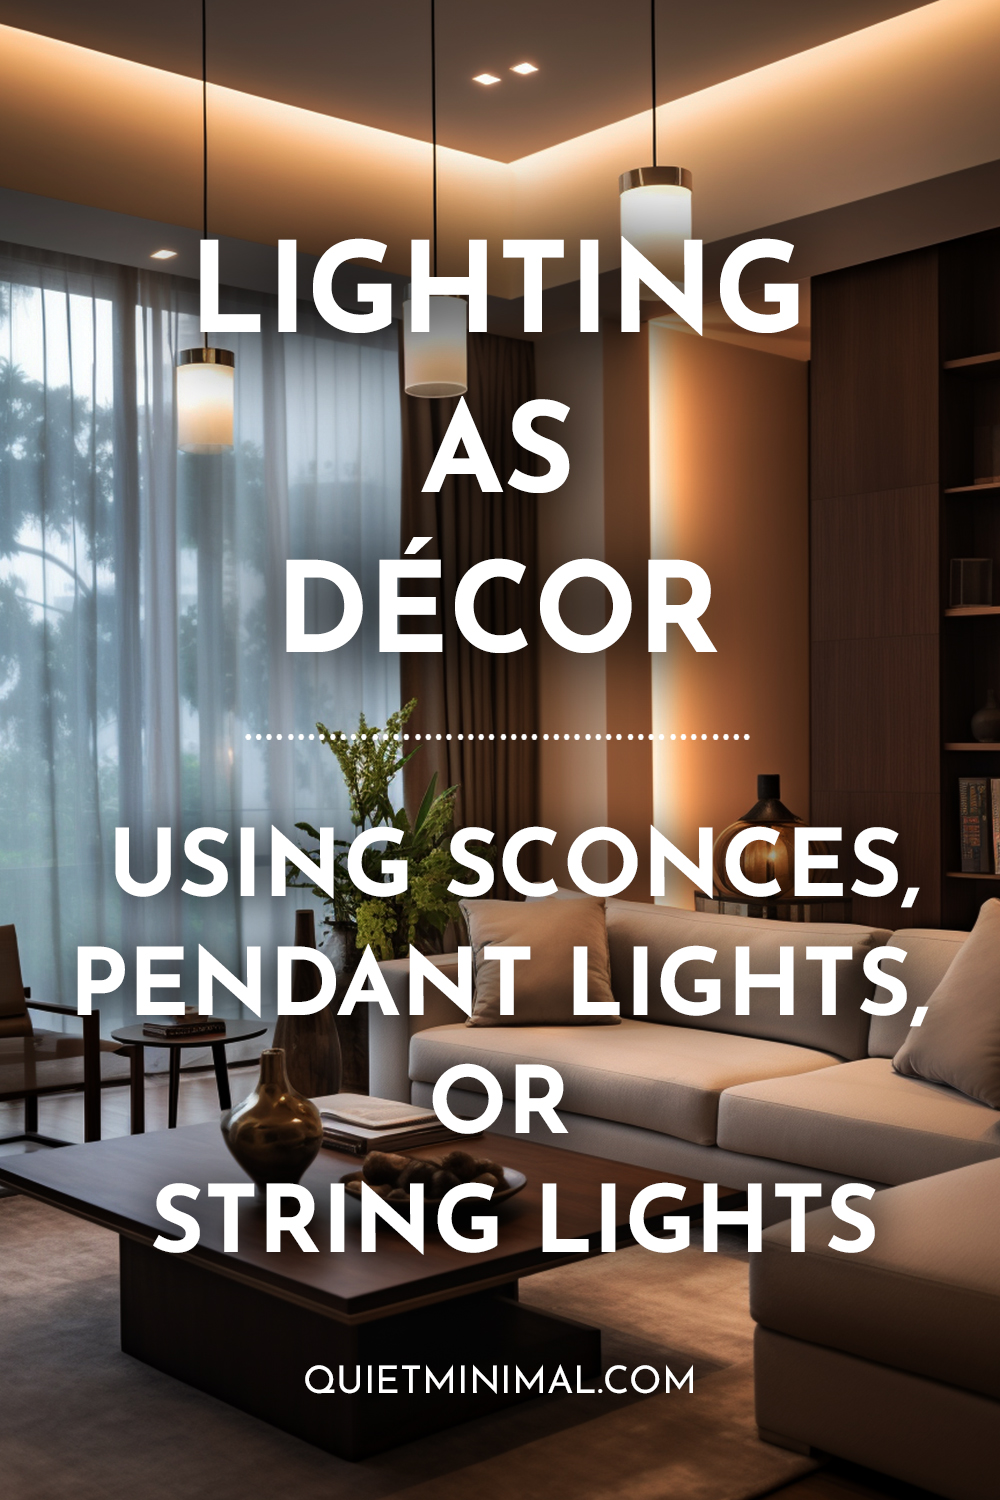 Lighting as décor using sconces and pendant lights.